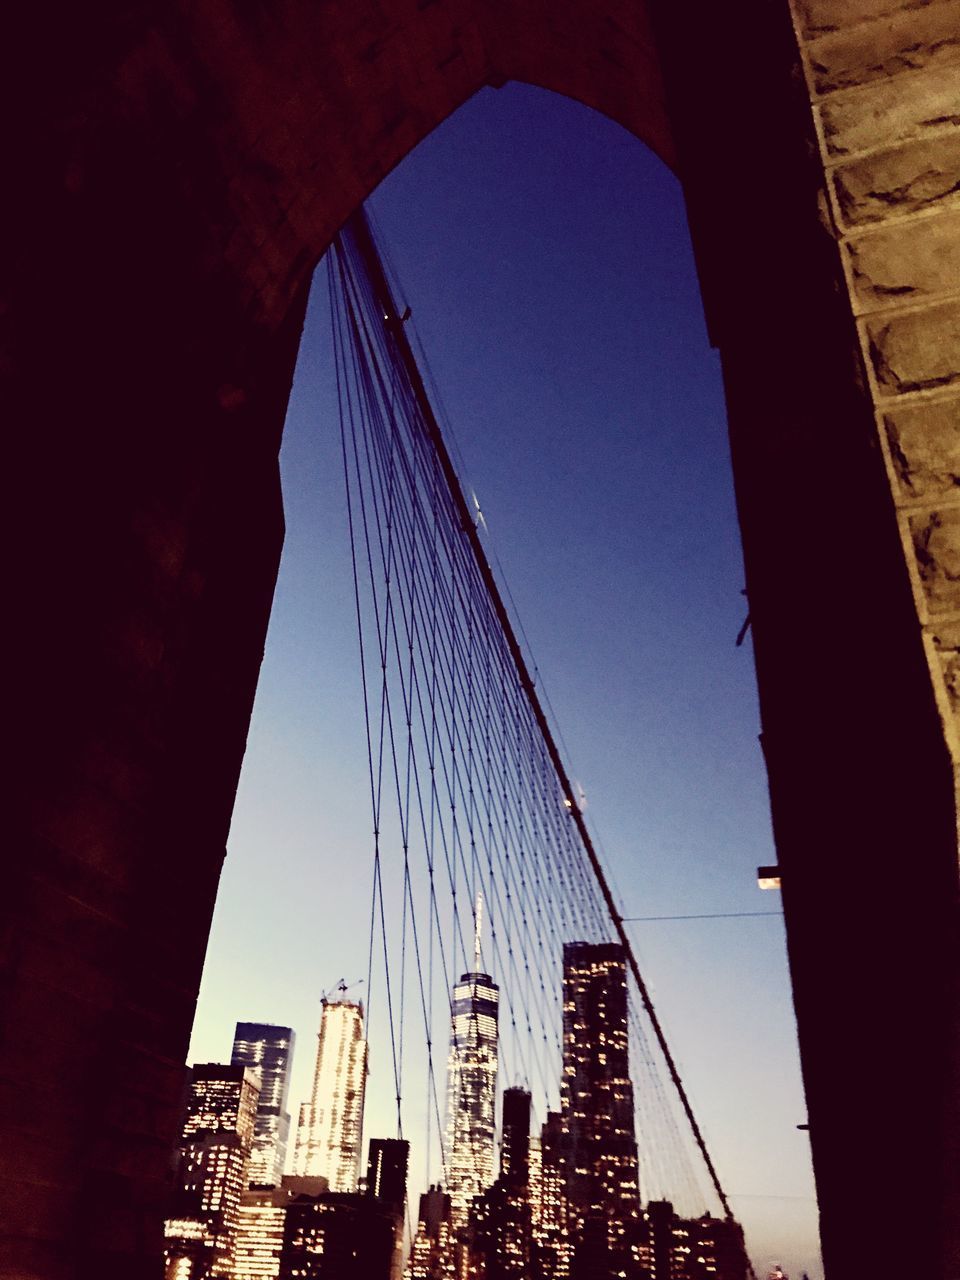 LOW ANGLE VIEW OF SUSPENSION BRIDGE IN CITY AGAINST SKY